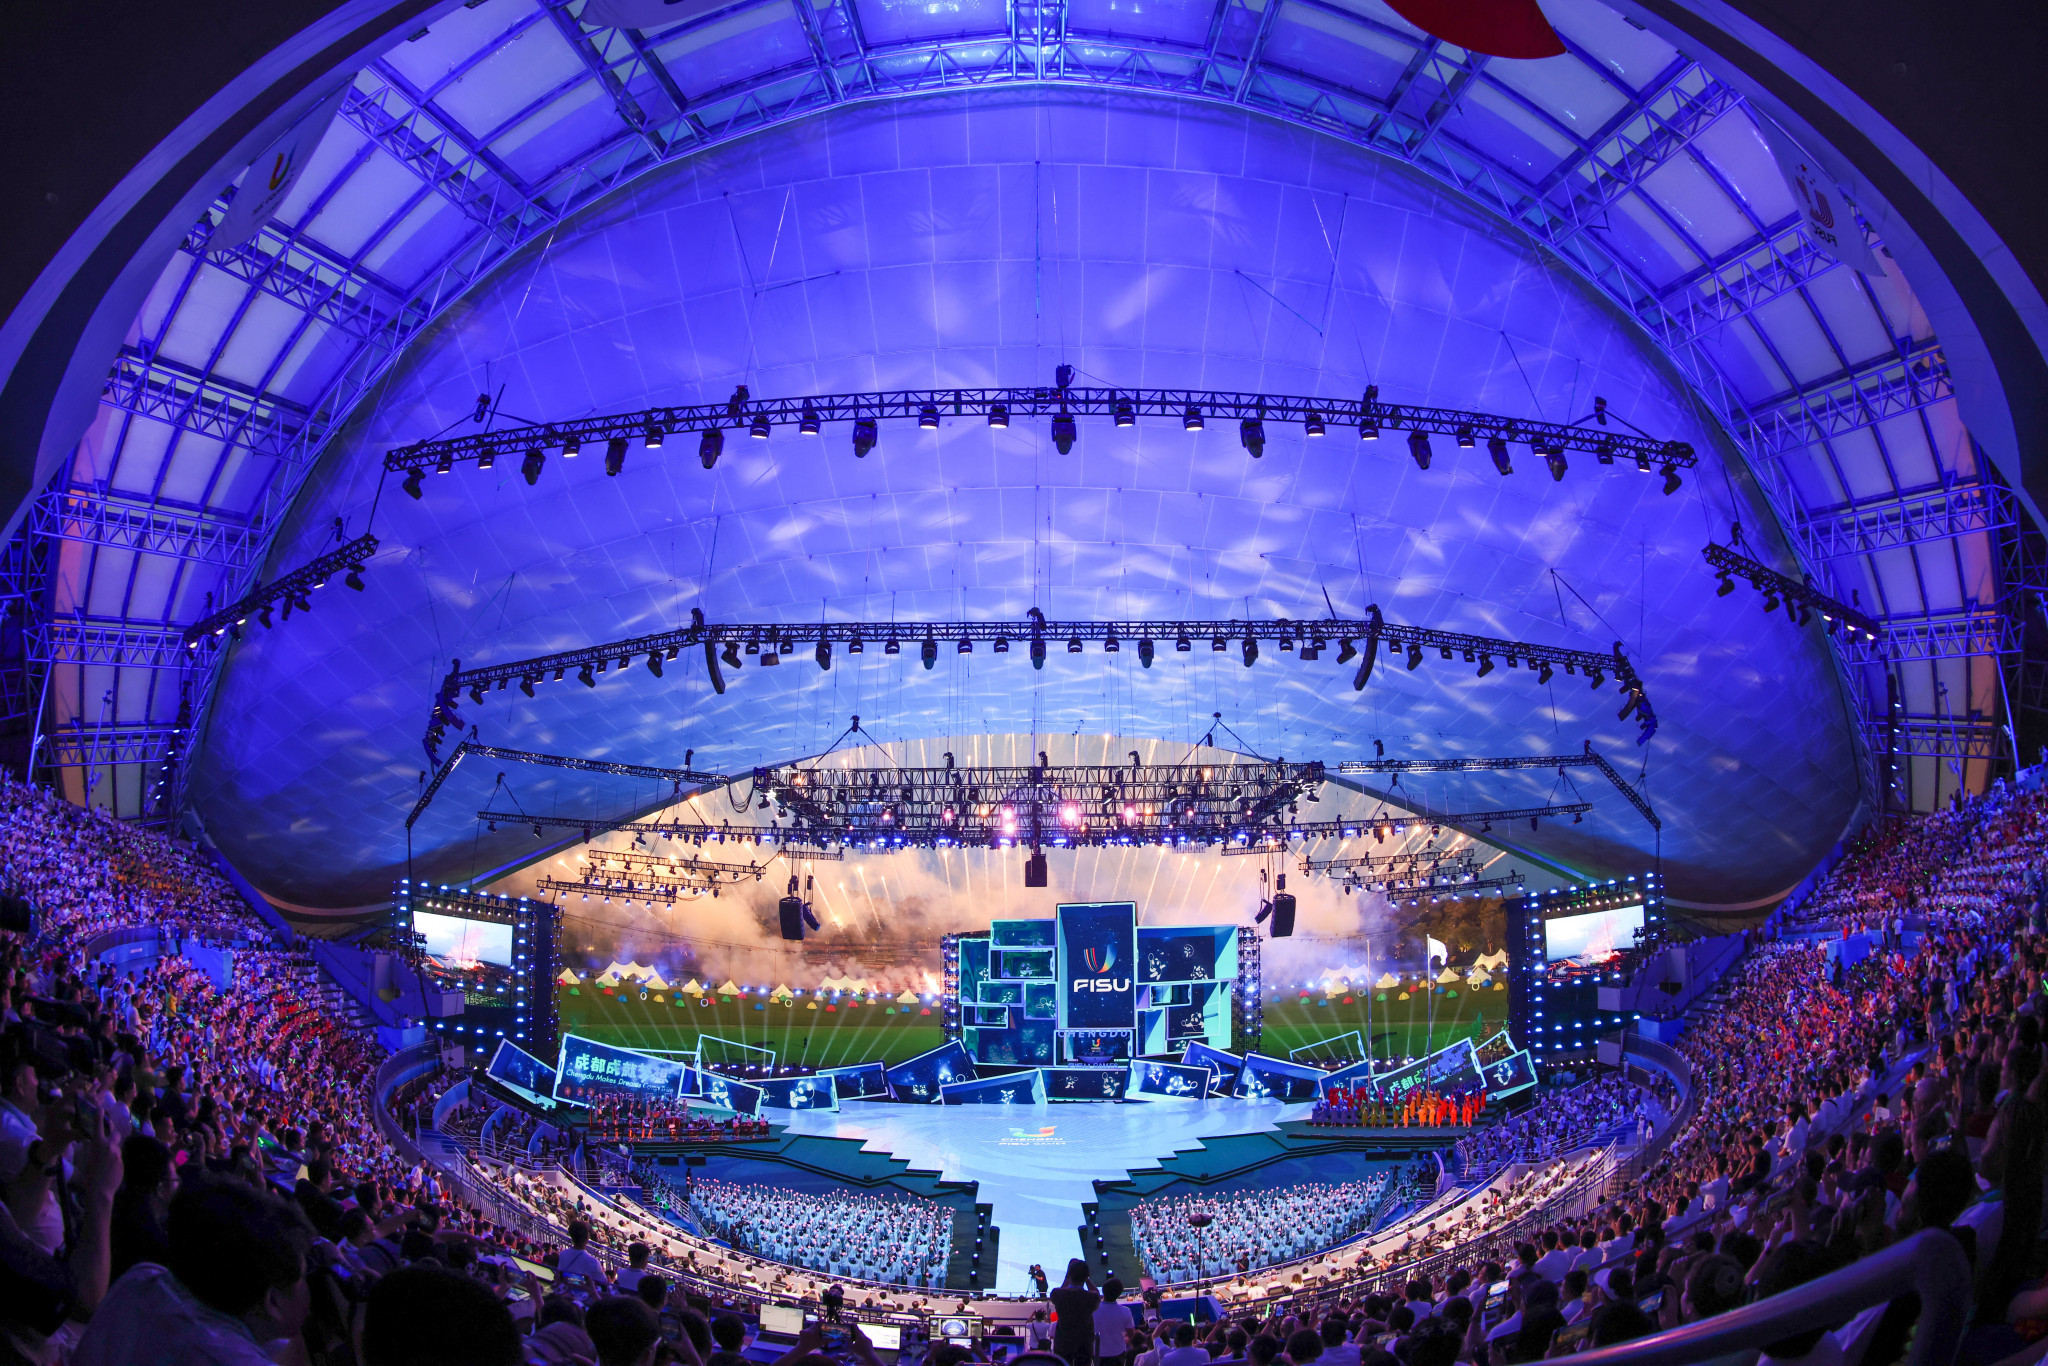 The Chengdu Open Air Music Park was the venue for the climax of the Chengdu 2021 Summer World University Games ©FISU